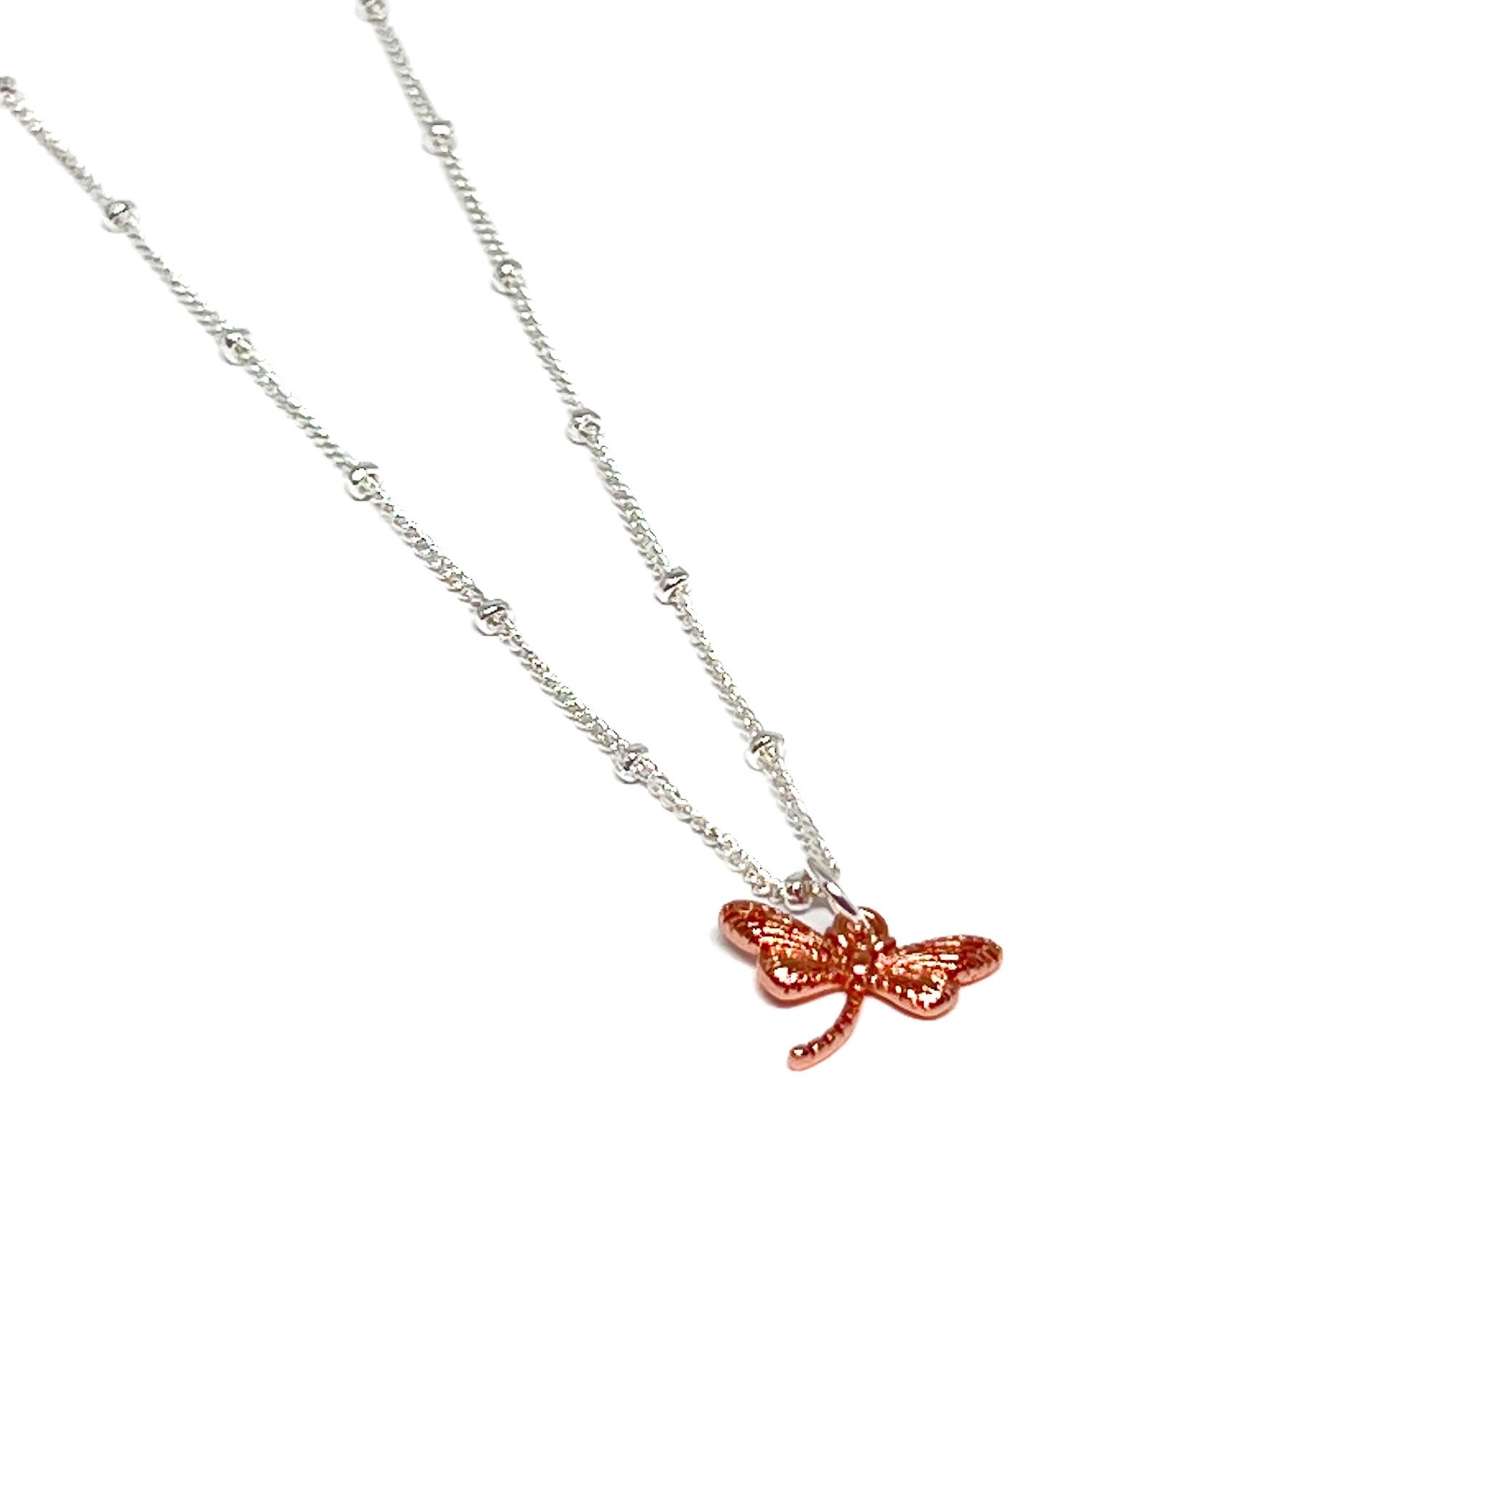 Sierra Dragonfly Necklace - Rose Gold